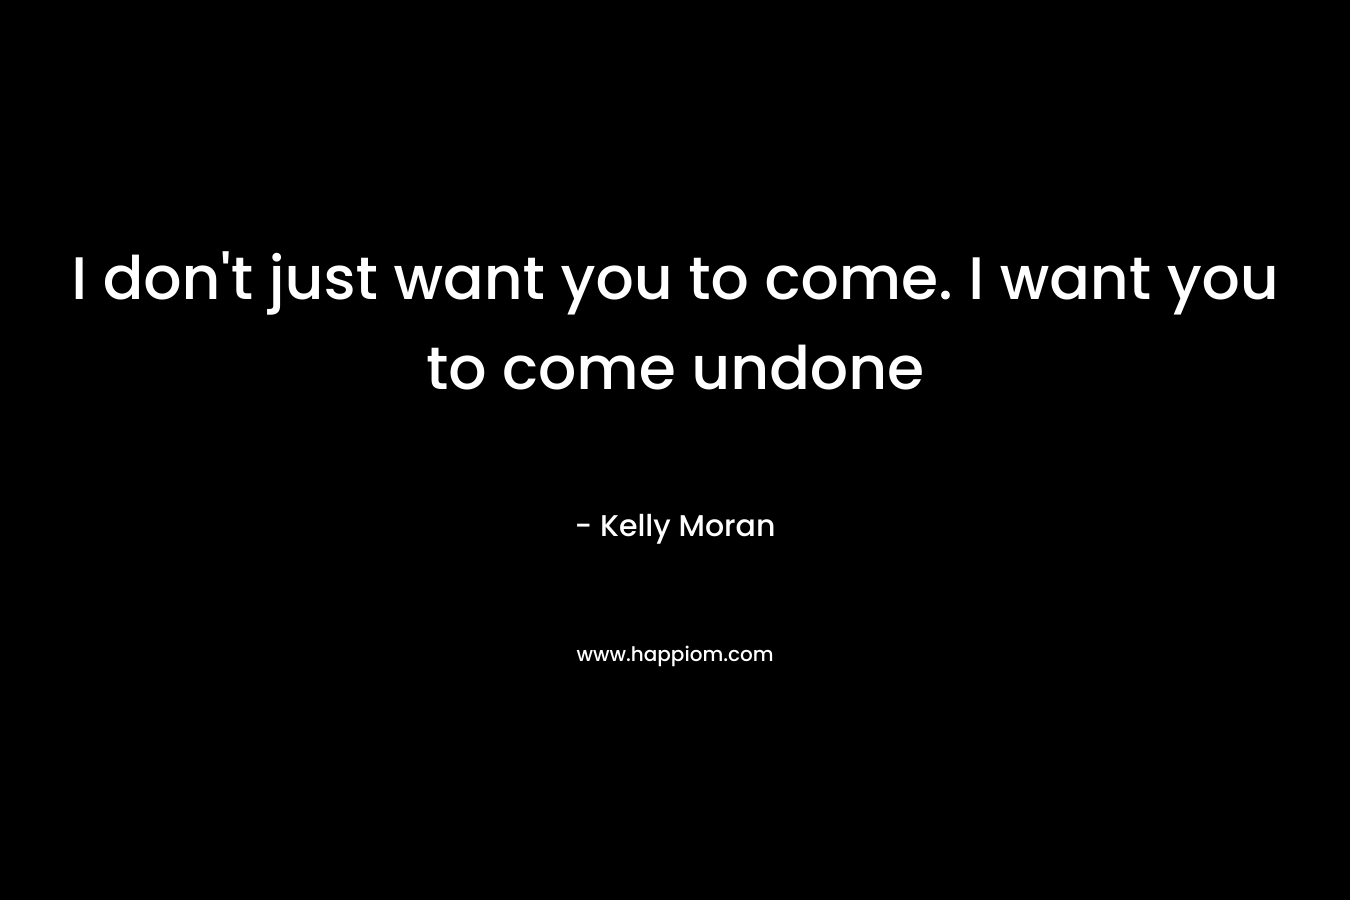 I don't just want you to come. I want you to come undone